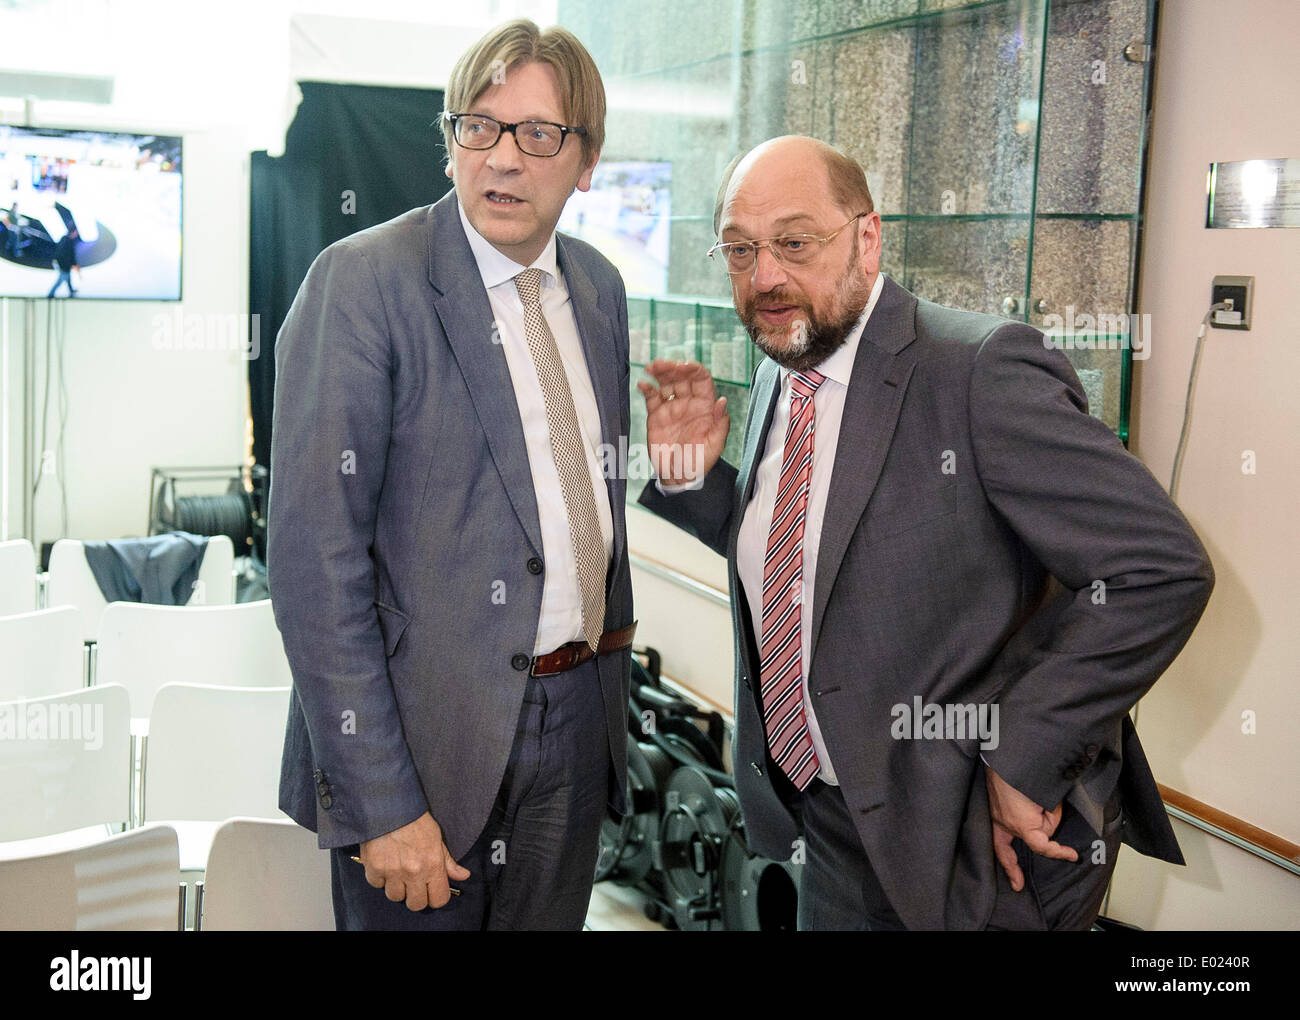 Brussels, Bxl, Belgium. 29th Apr, 2014. Guy Verhofstadt (L), top candidate of Liberals (ALDE) and Martin Schulz (R ), top candidate of the Party of European Socialists (PSE) chat ahead of Euranet's 'Big Crunch' Presidential debate at the EU parliament in Brussels, Belgium on 29.04.2014 The four top candidates for the presidency of the European Commission - Jean-Claude Juncker, Ska Keller, Martin Schulz and Guy Verhofstadt - attend EU-wide debate organized by EuranetPlus and focused on the major election topics. by Wiktor Dabkowski Credit:  Wiktor Dabkowski/ZUMAPRESS.com/Alamy Live News Stock Photo